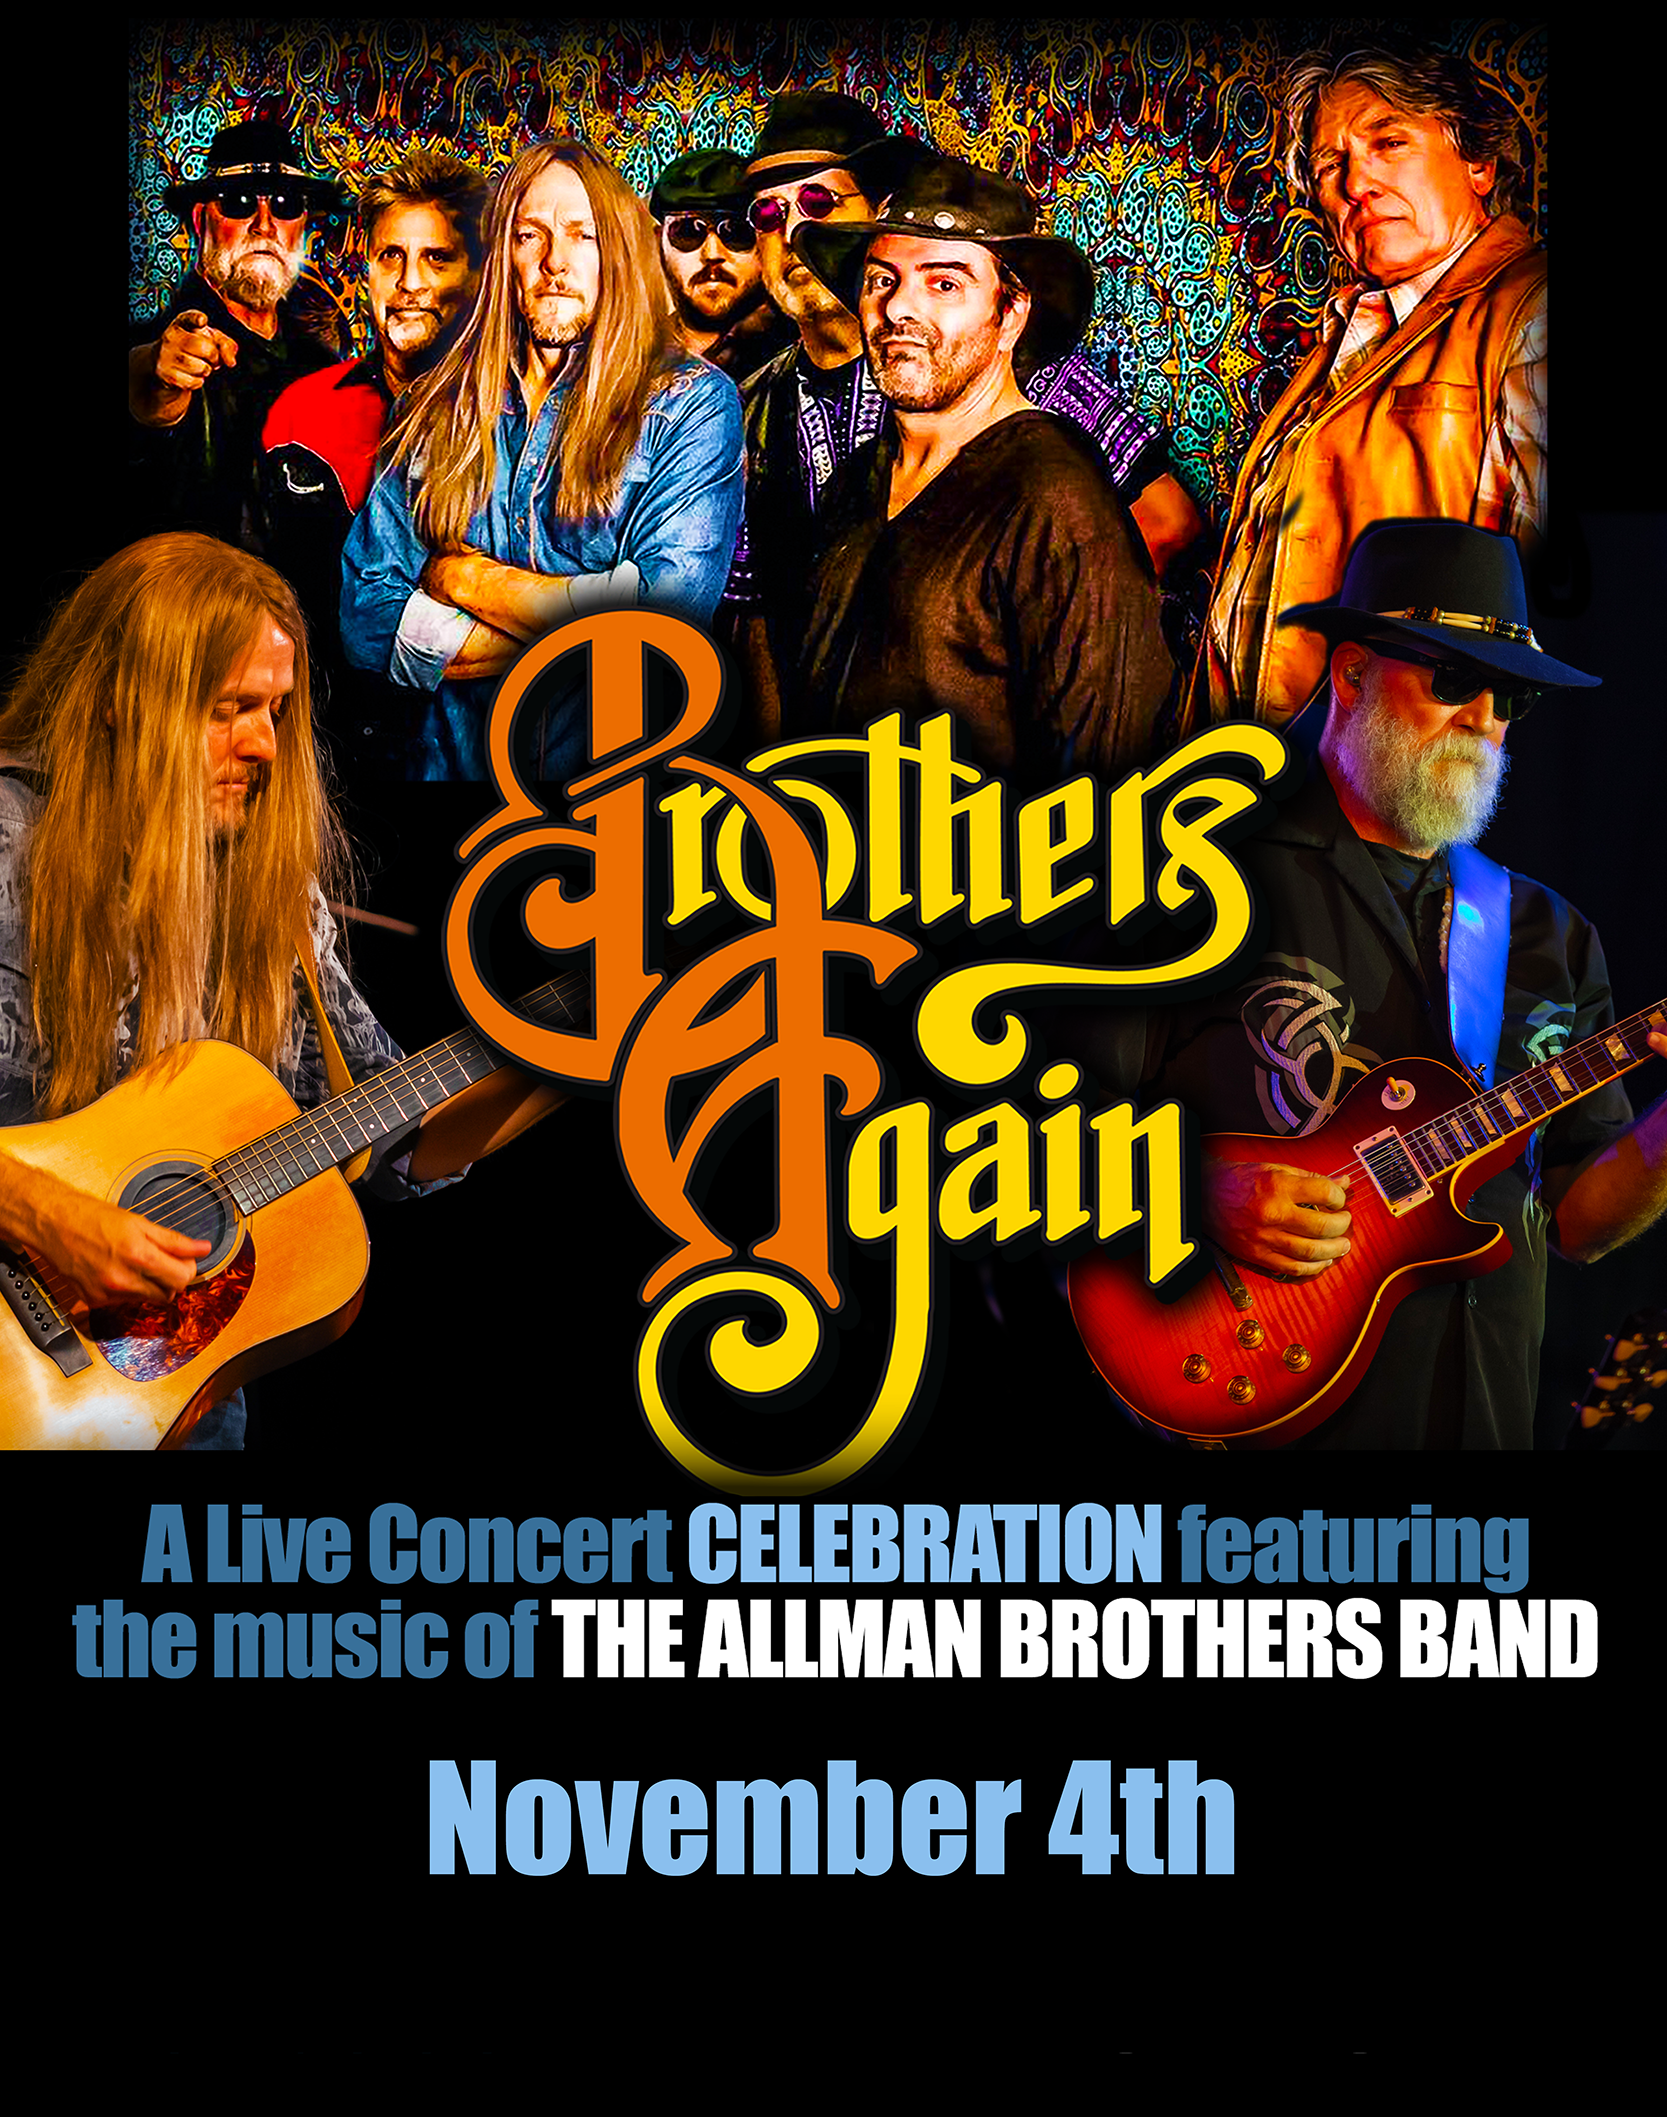 Brothers Again, a live concert celebration featuring the music of the Allman Brothers Band on November 4th